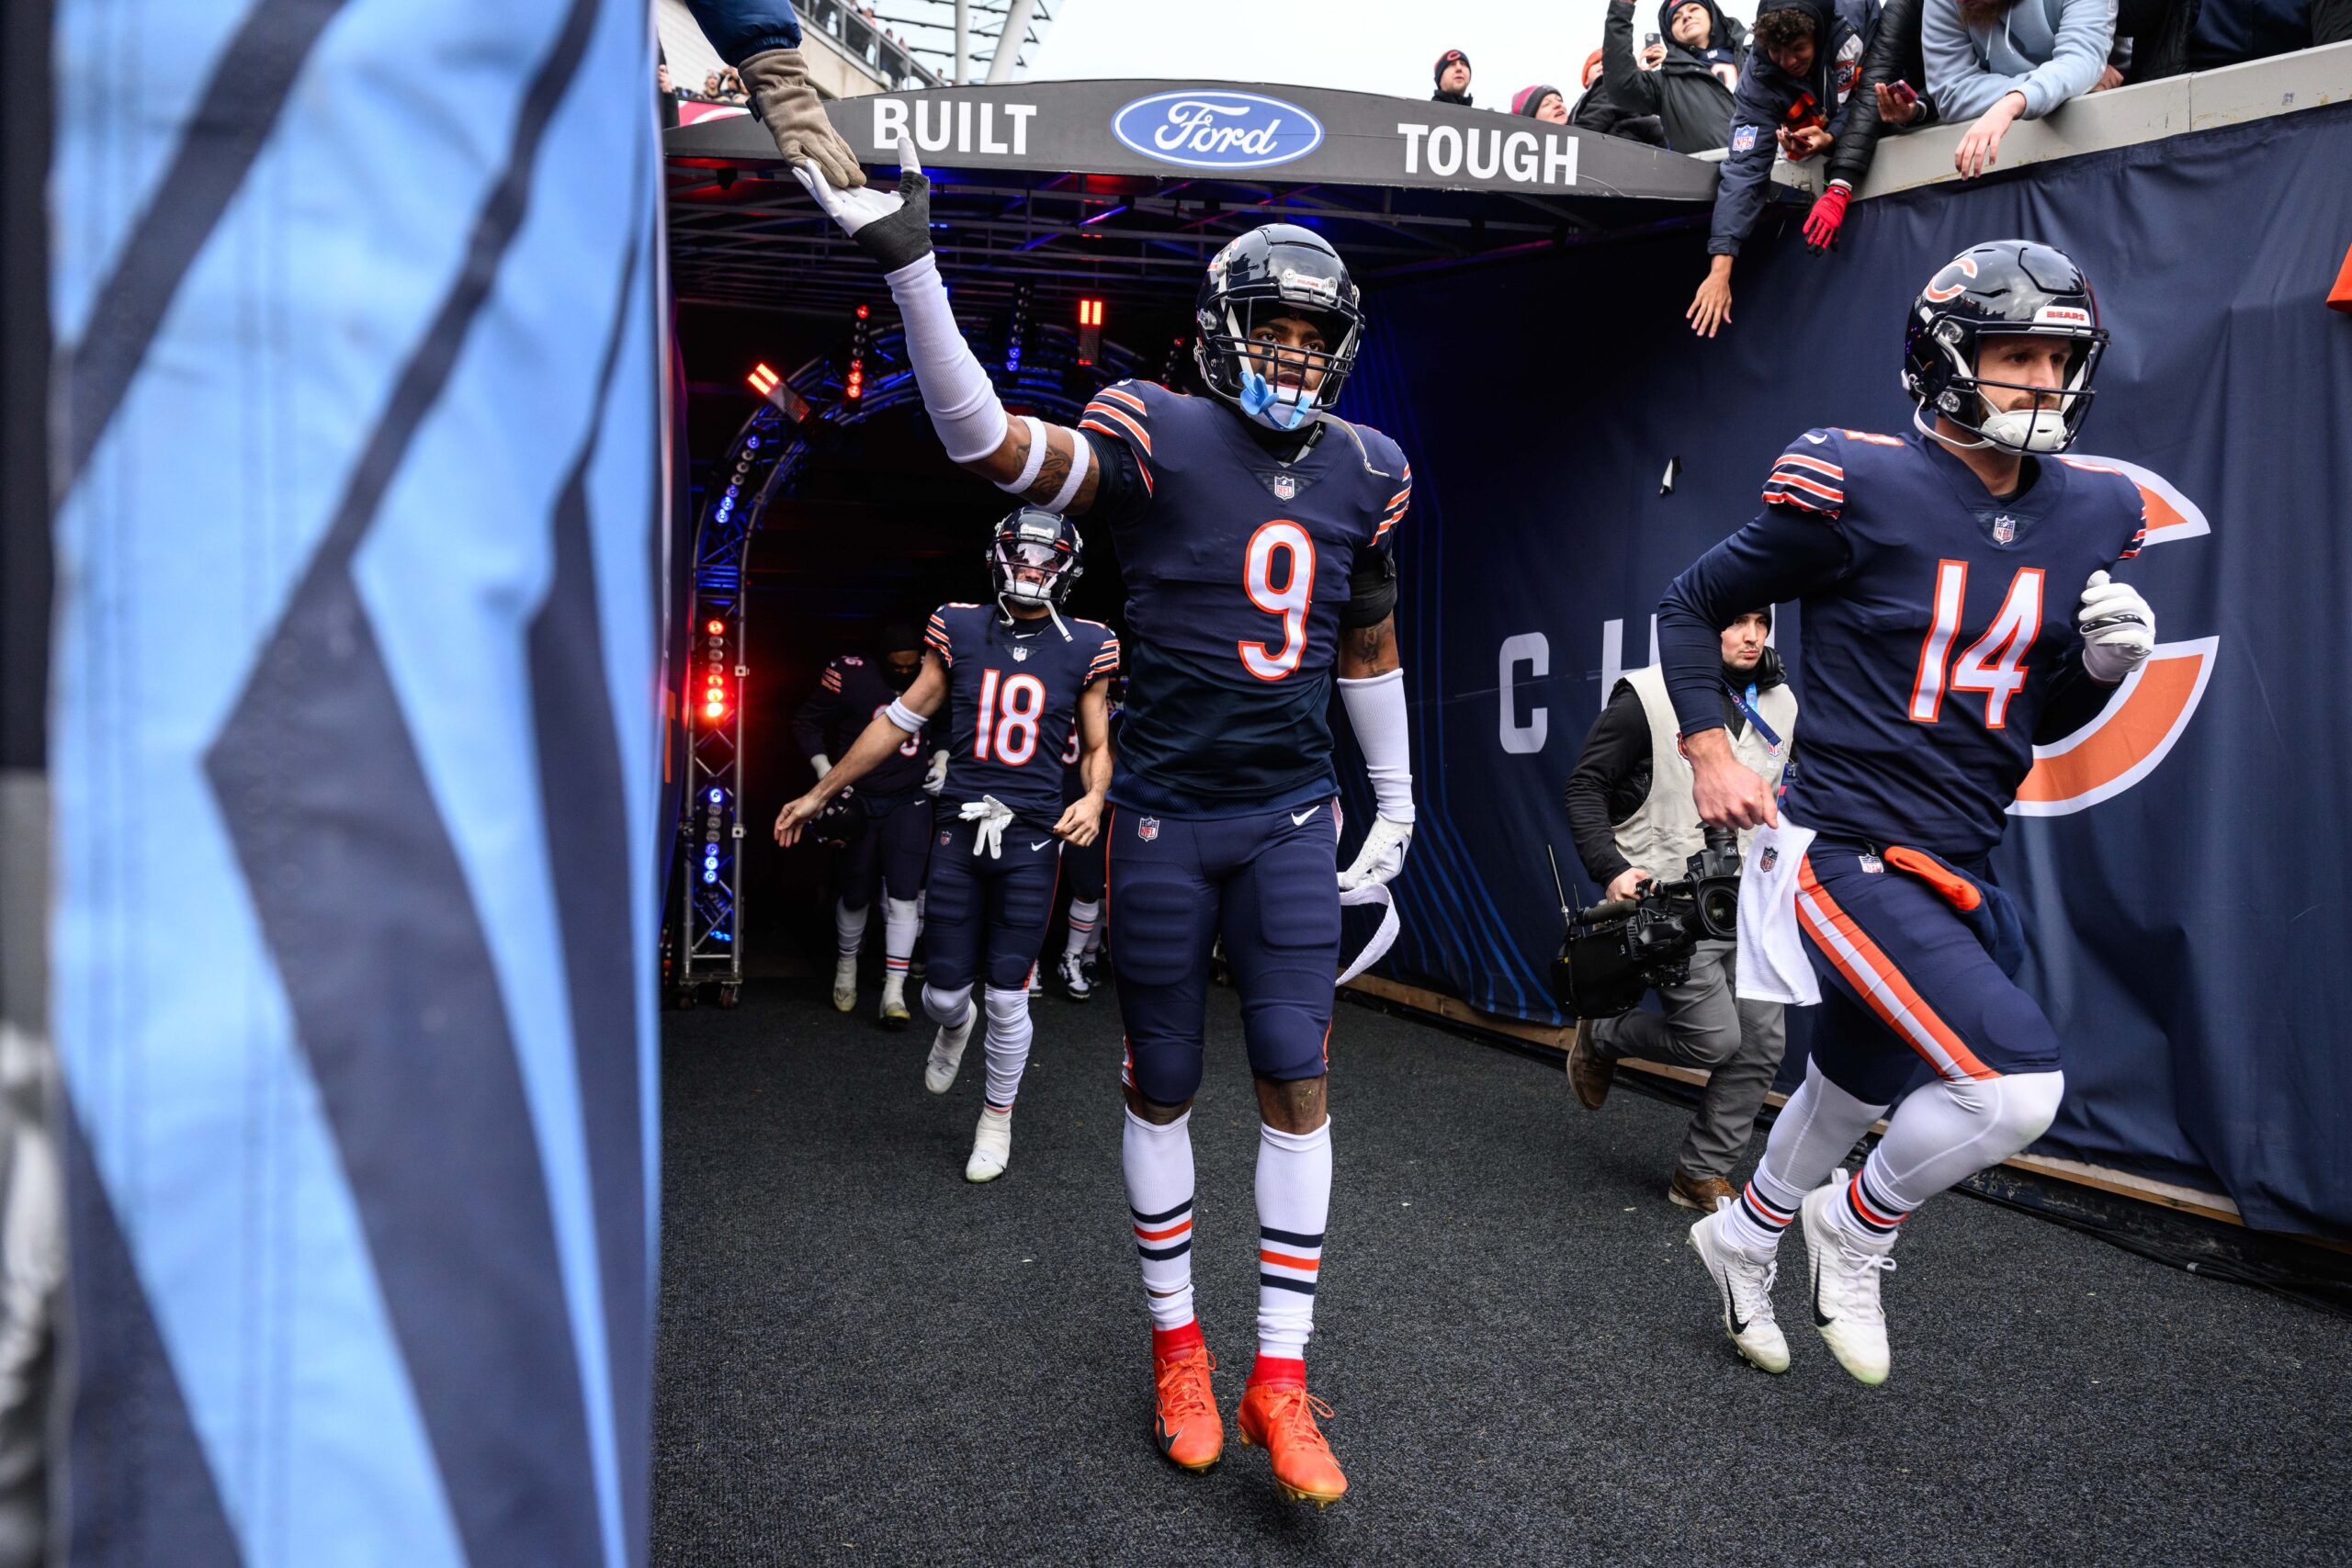 Jan 8, 2023; Chicago, Illinois, USA; Chicago Bears strong safety Jaquan Brisker (9) enters the field before the game against the Minnesota Vikings at Soldier Field. Mandatory Credit: Daniel Bartel-USA TODAY Sports